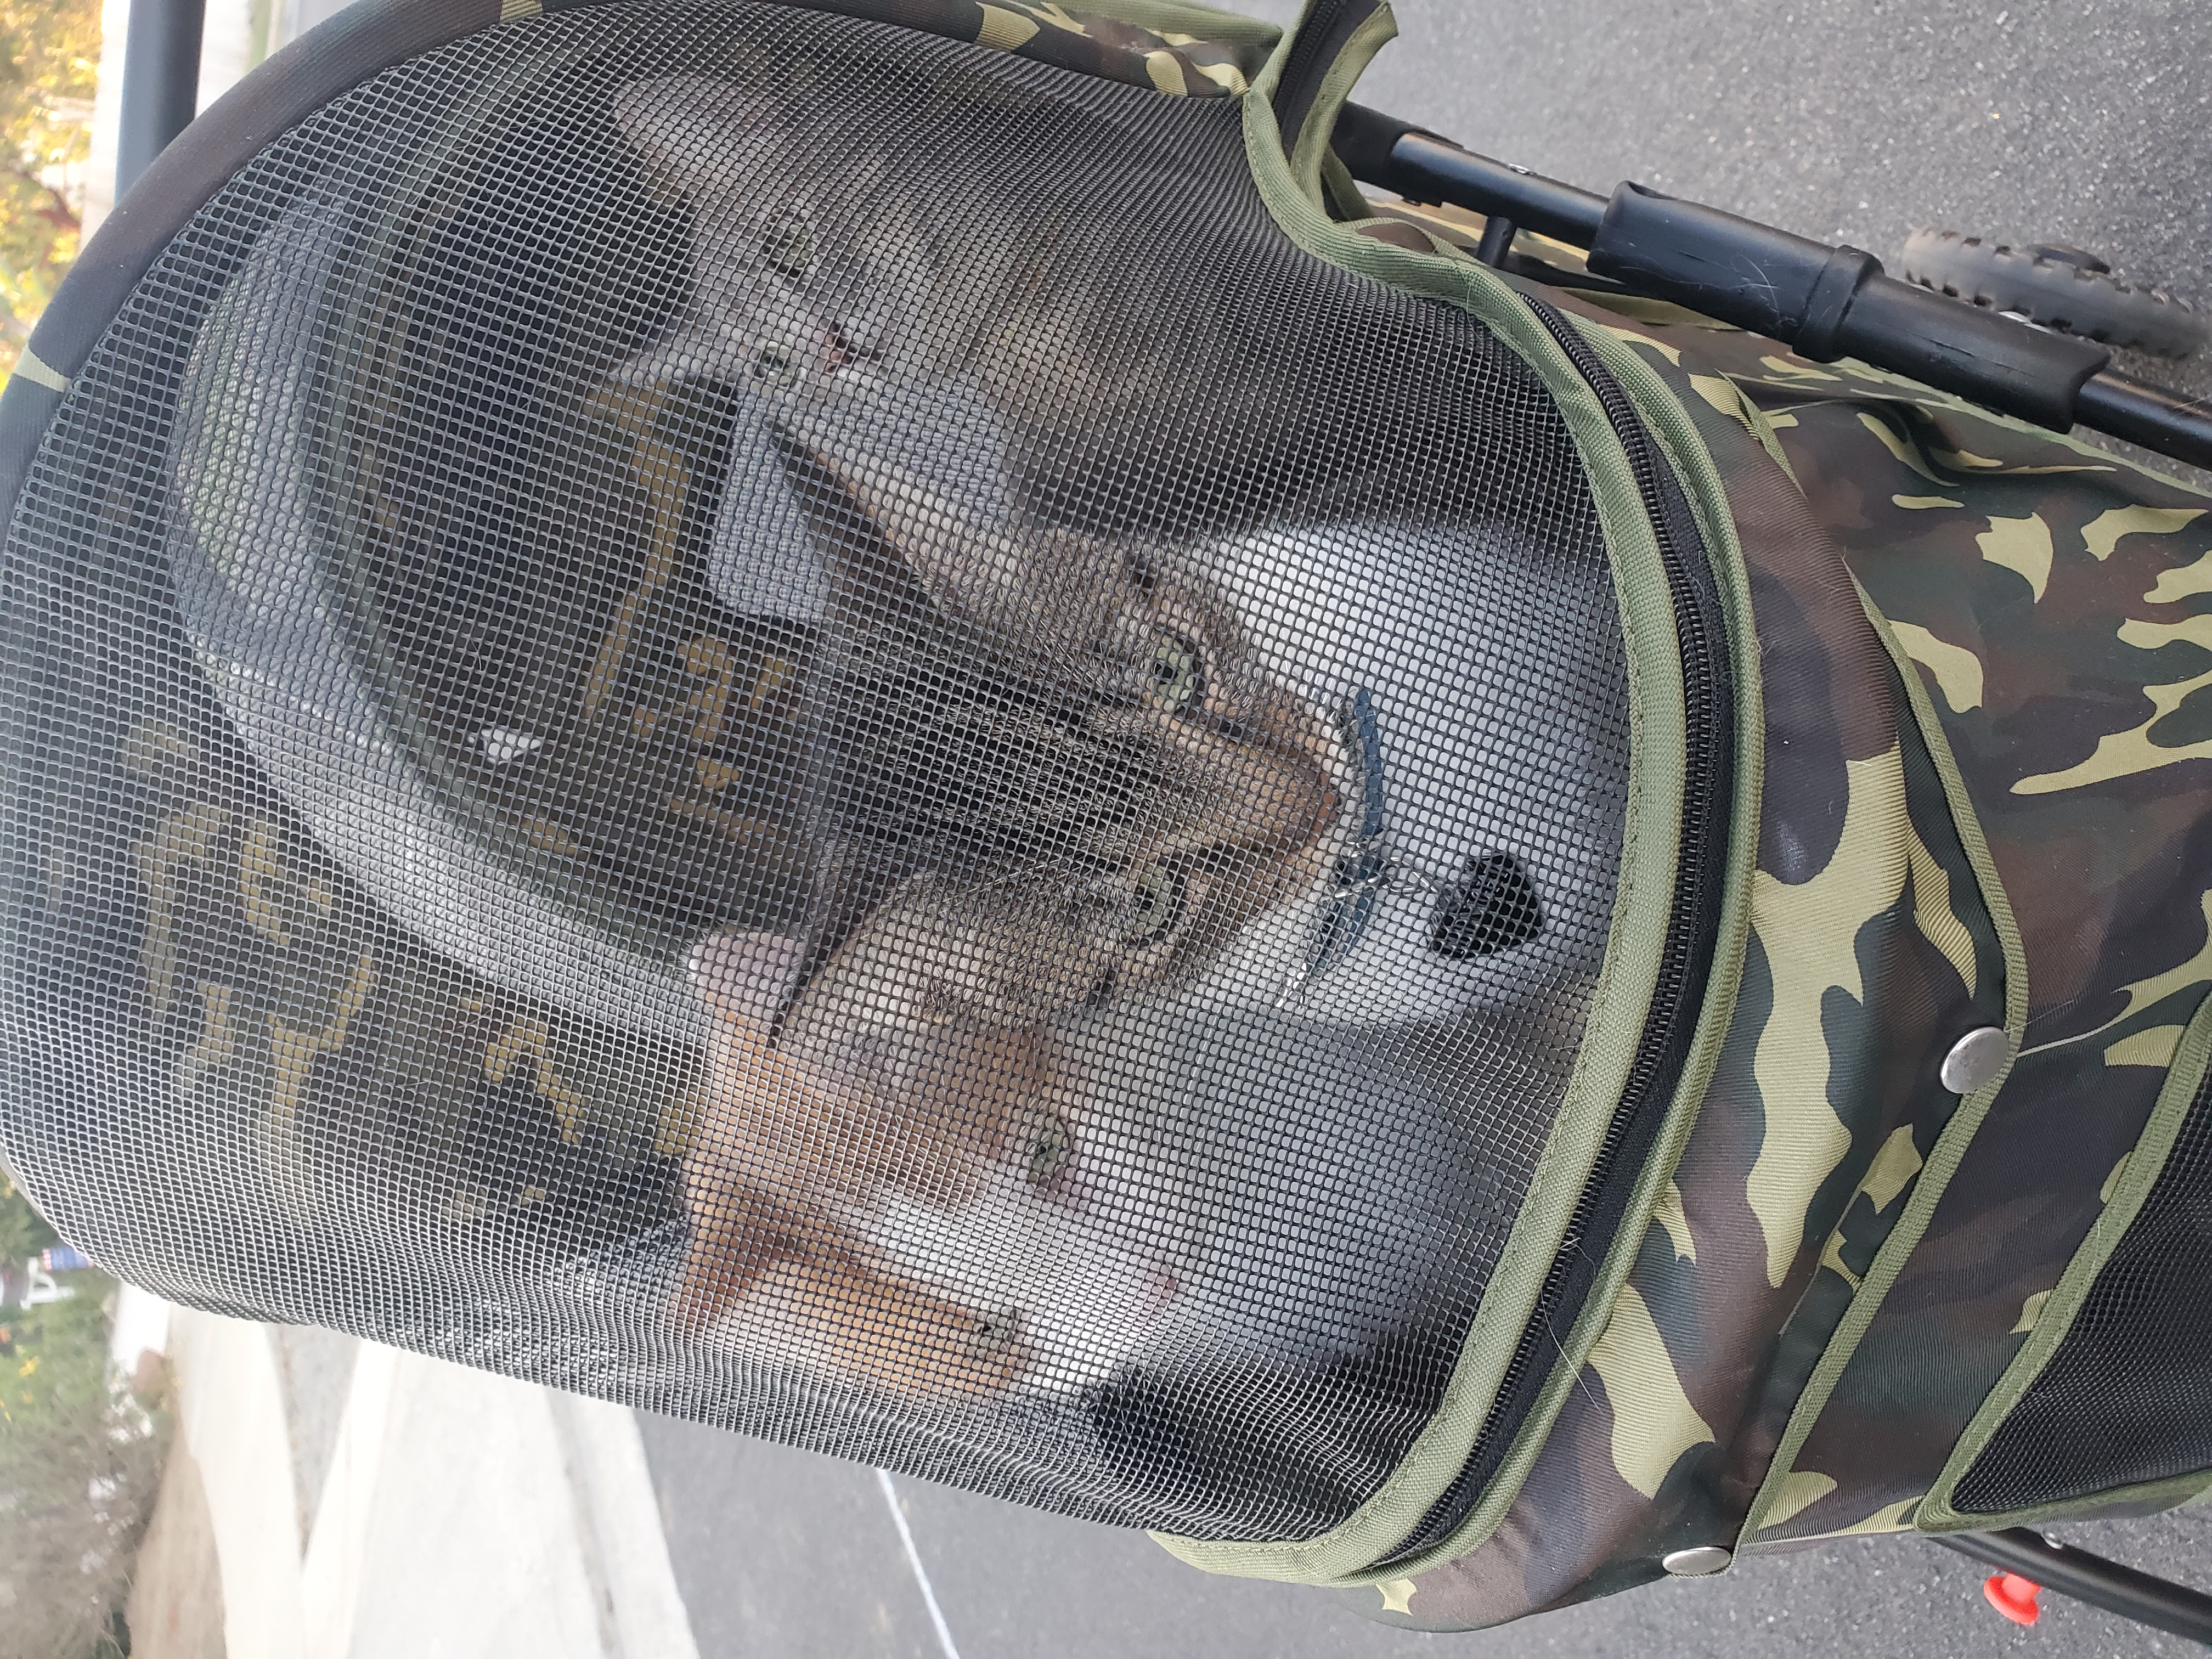 My Cats (Left to Right) Savage, Midnight, & Comet in their stroller for a walk :)